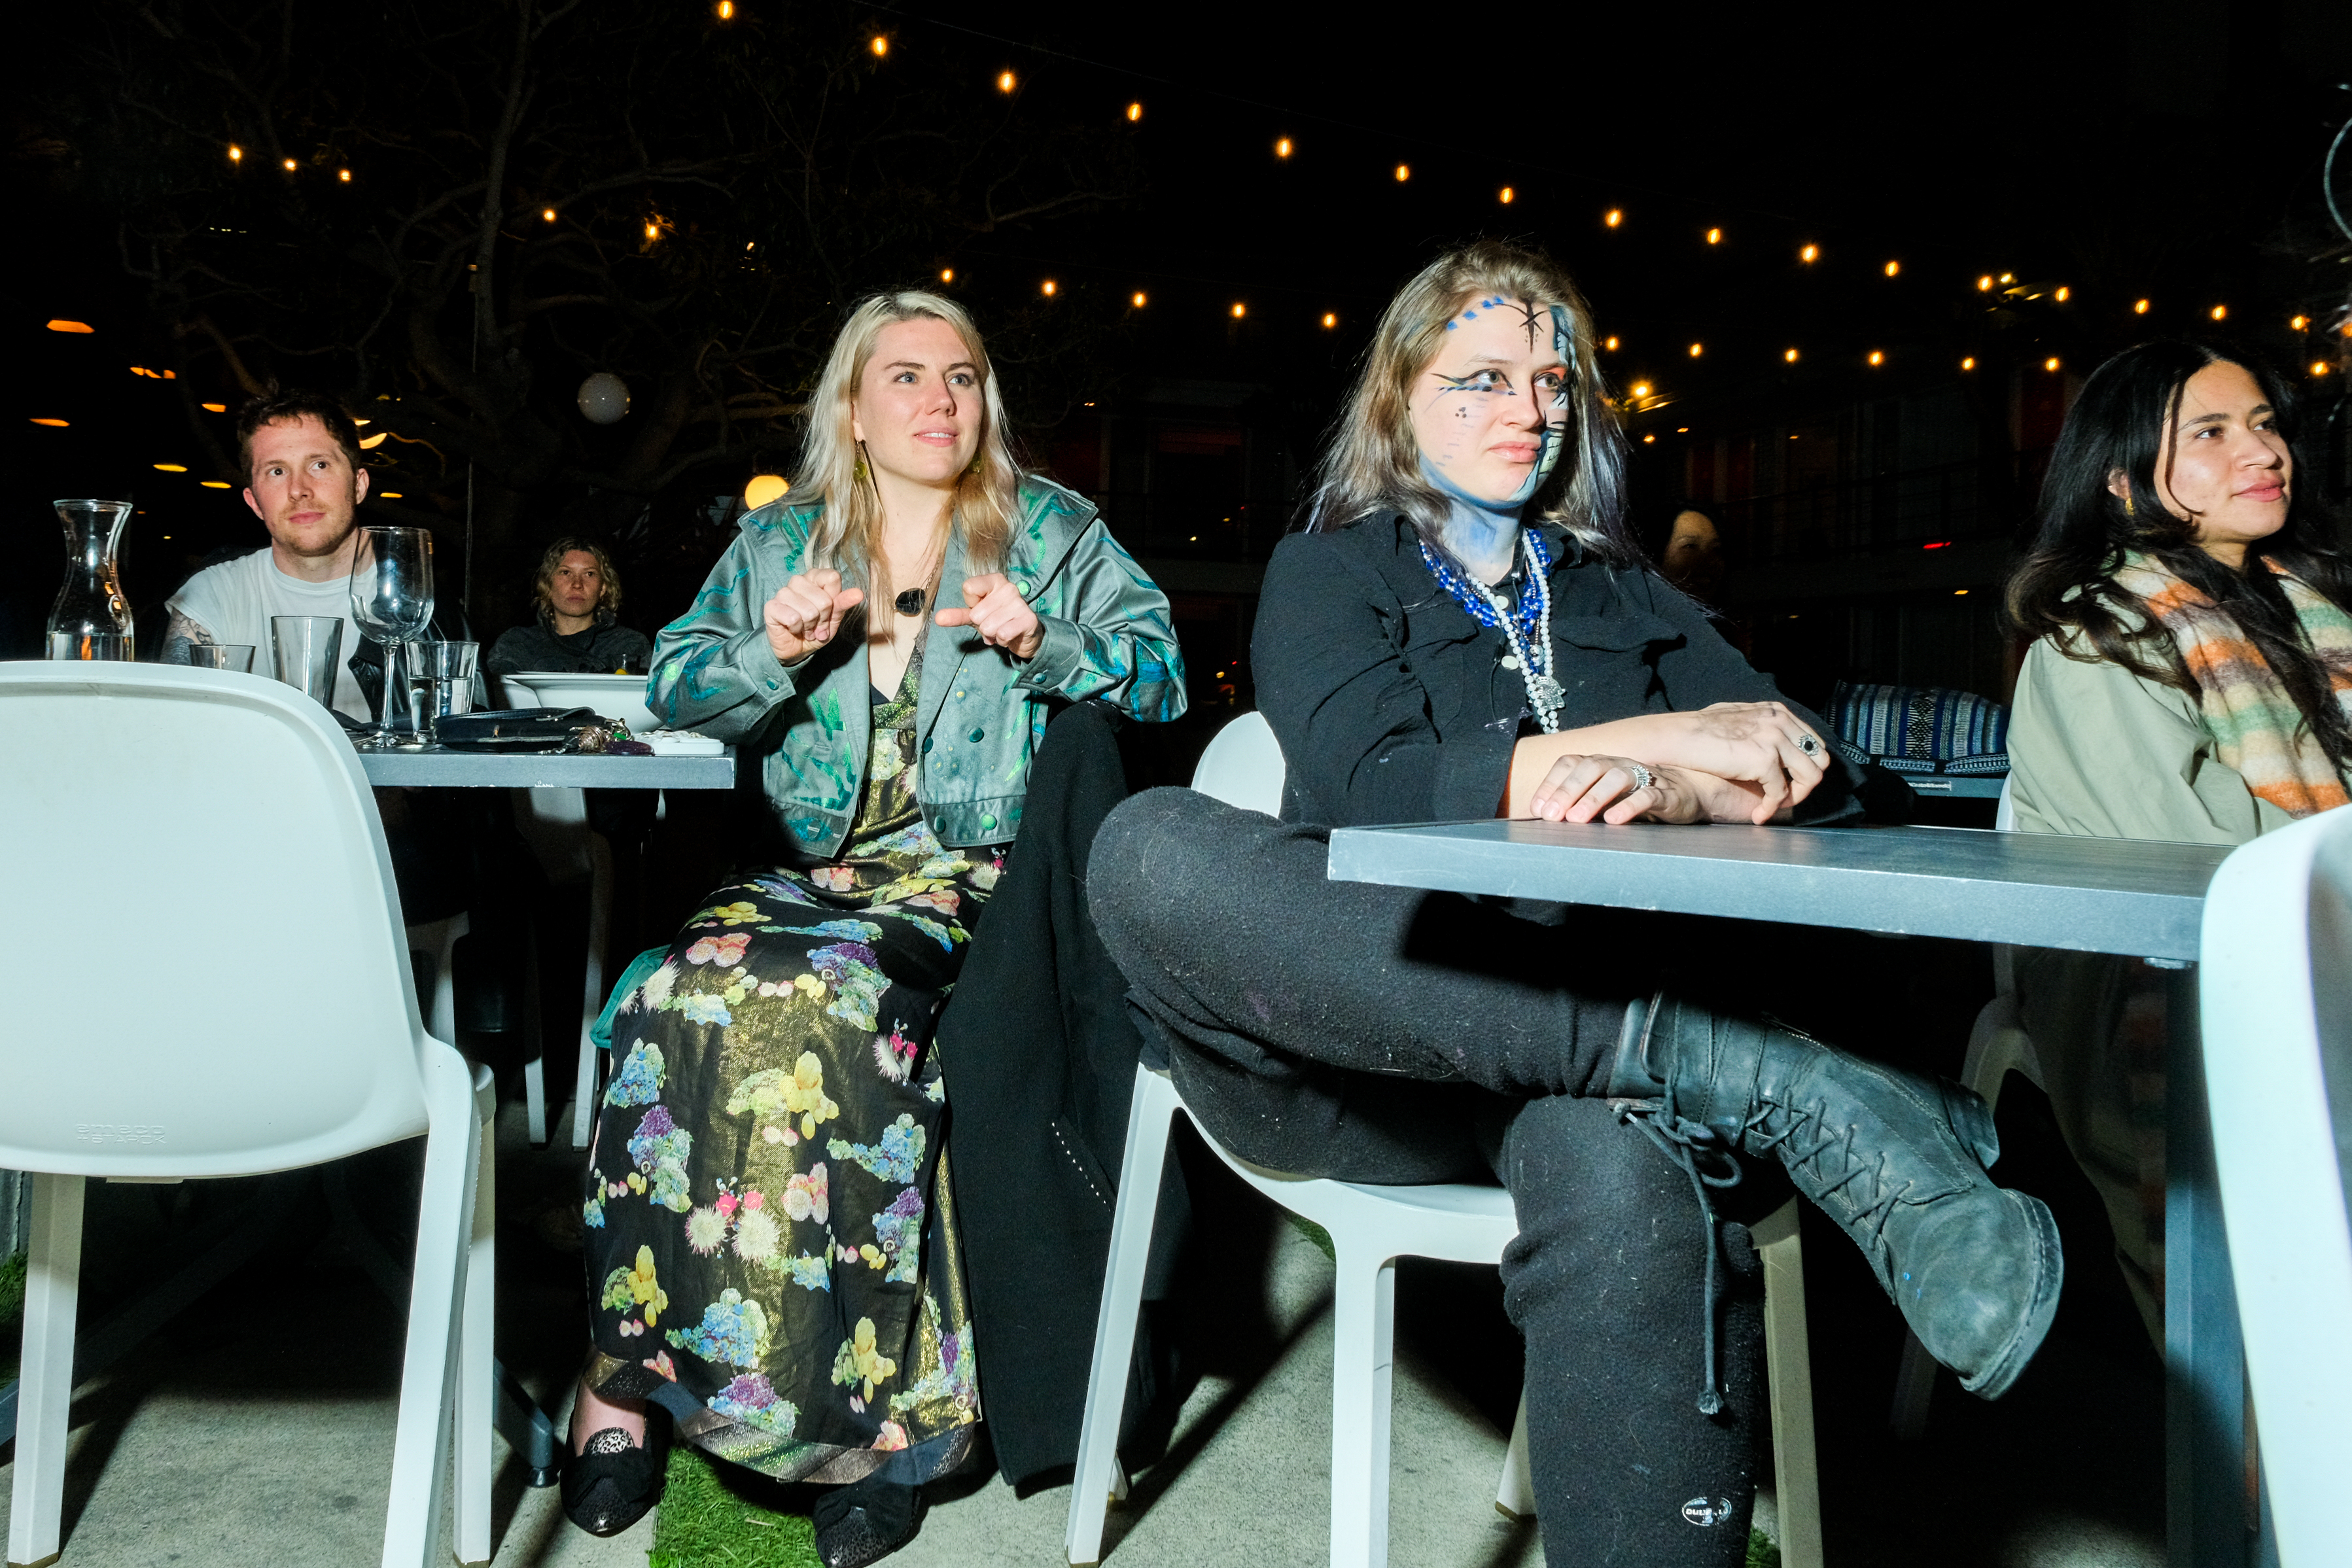 Four people sit at an outdoor table at night, with string lights above and half-empty glasses.